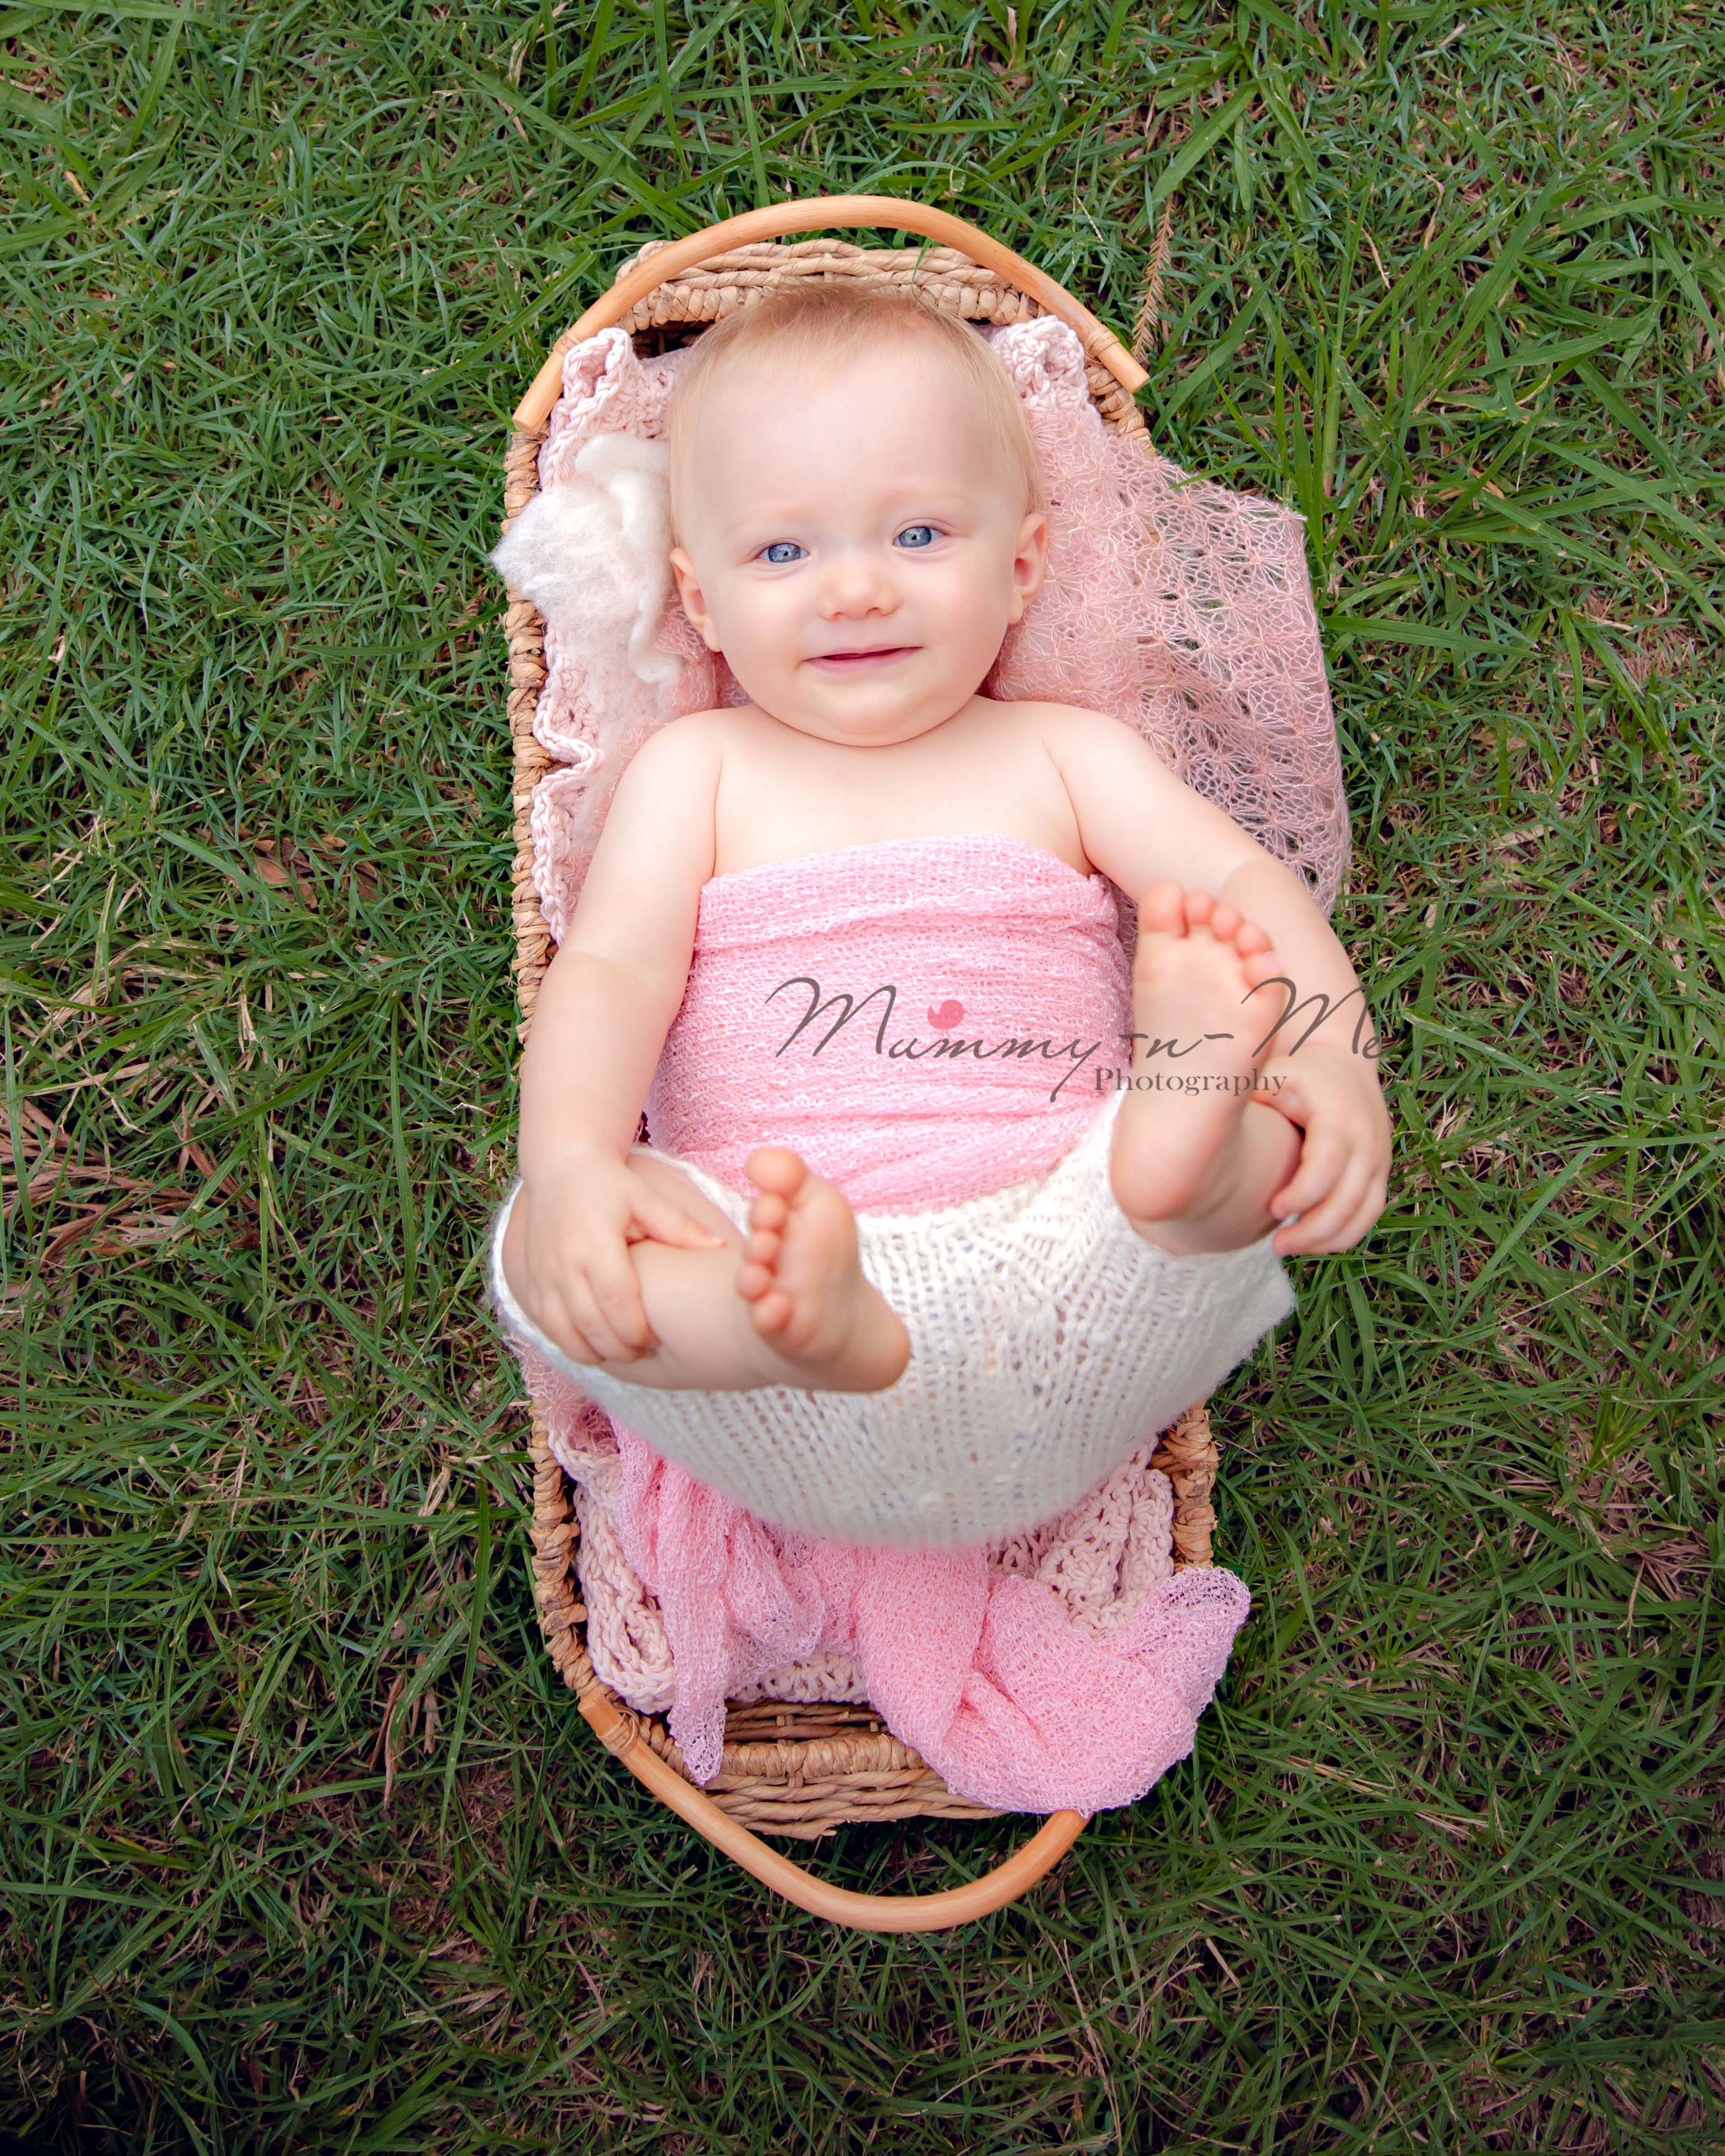 9 mth baby girl in pink wrap at the park Brisbane Family Child Baby Photographer